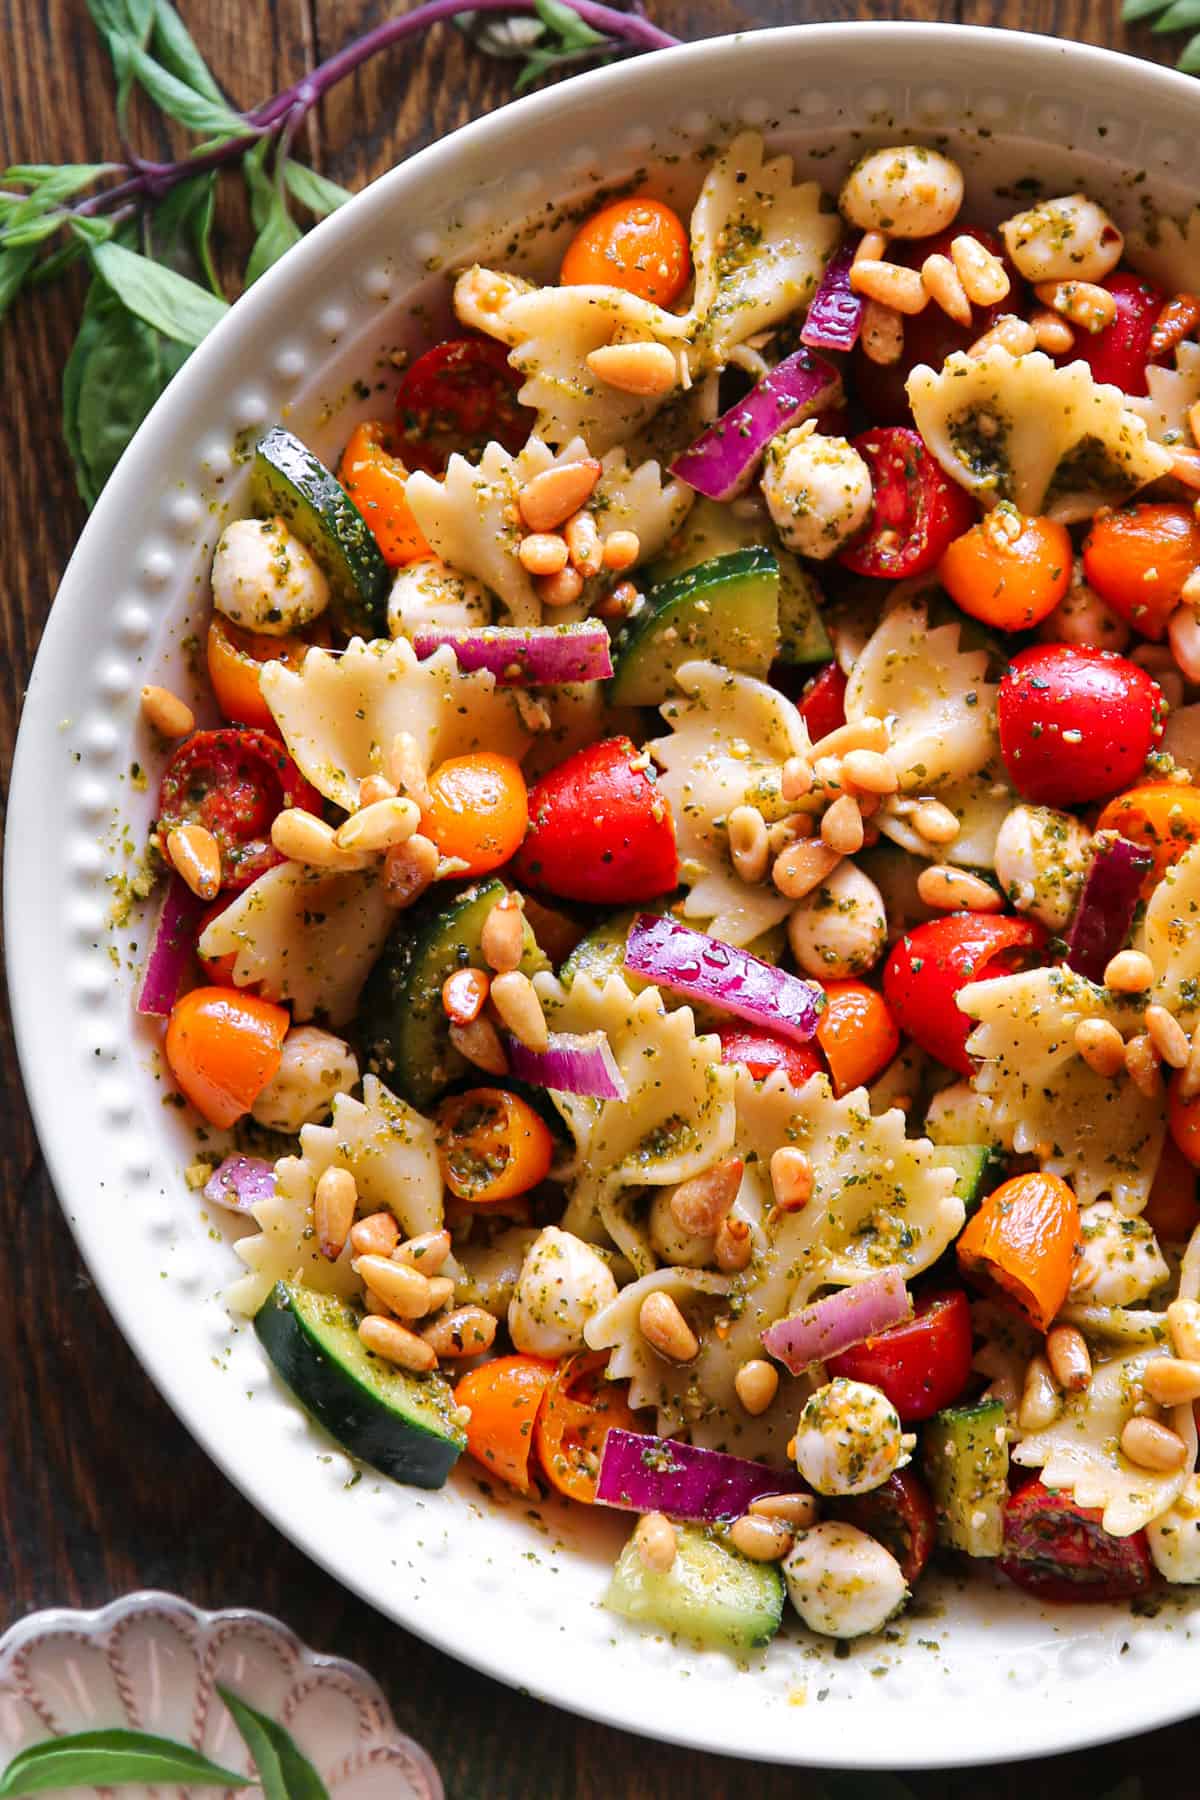 Pesto Pasta Salad with Cherry Tomatoes, Cucumber, Red Onion, Pine Nuts, and Mozzarella cheese - in a white bowl.